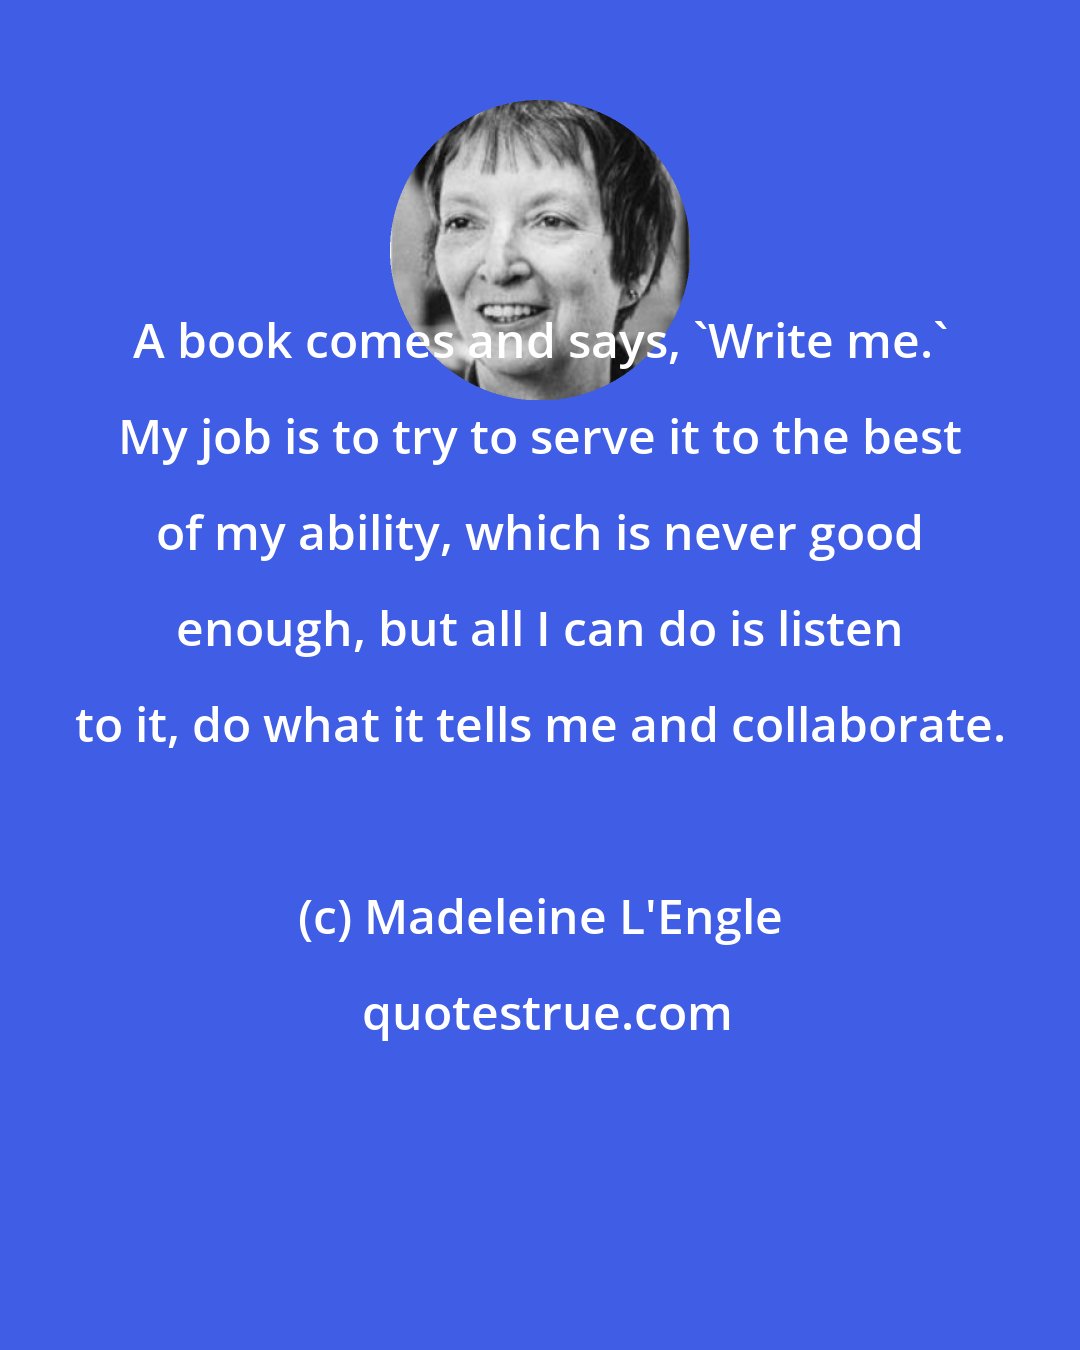 Madeleine L'Engle: A book comes and says, 'Write me.' My job is to try to serve it to the best of my ability, which is never good enough, but all I can do is listen to it, do what it tells me and collaborate.